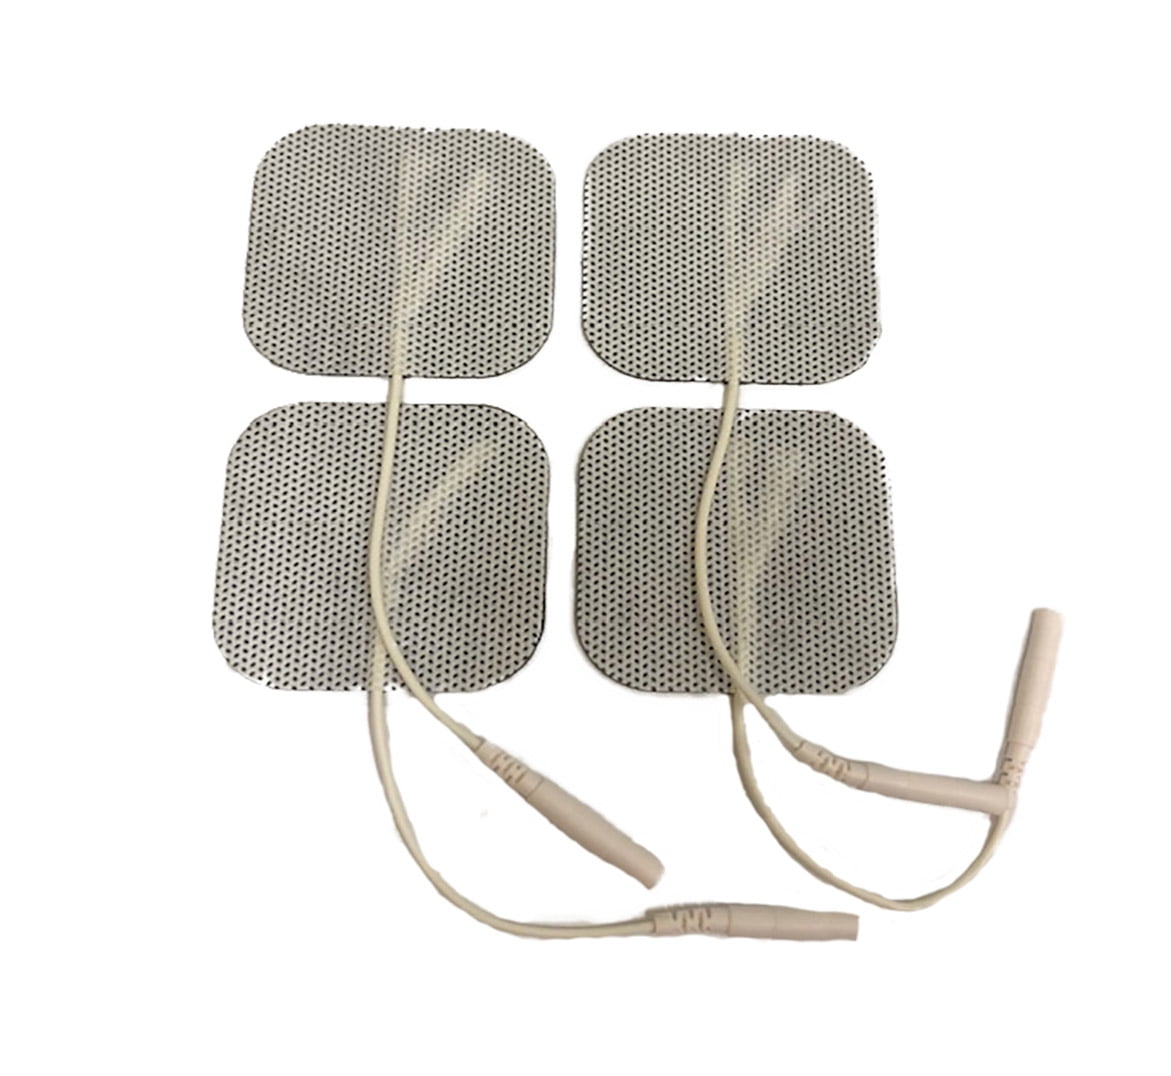 TENS Unit Replacement Pads - Pack of 16 Electrode Squares for Muscle  Stimulation & Therapy - 2 x 4 Stimulator Pad Set